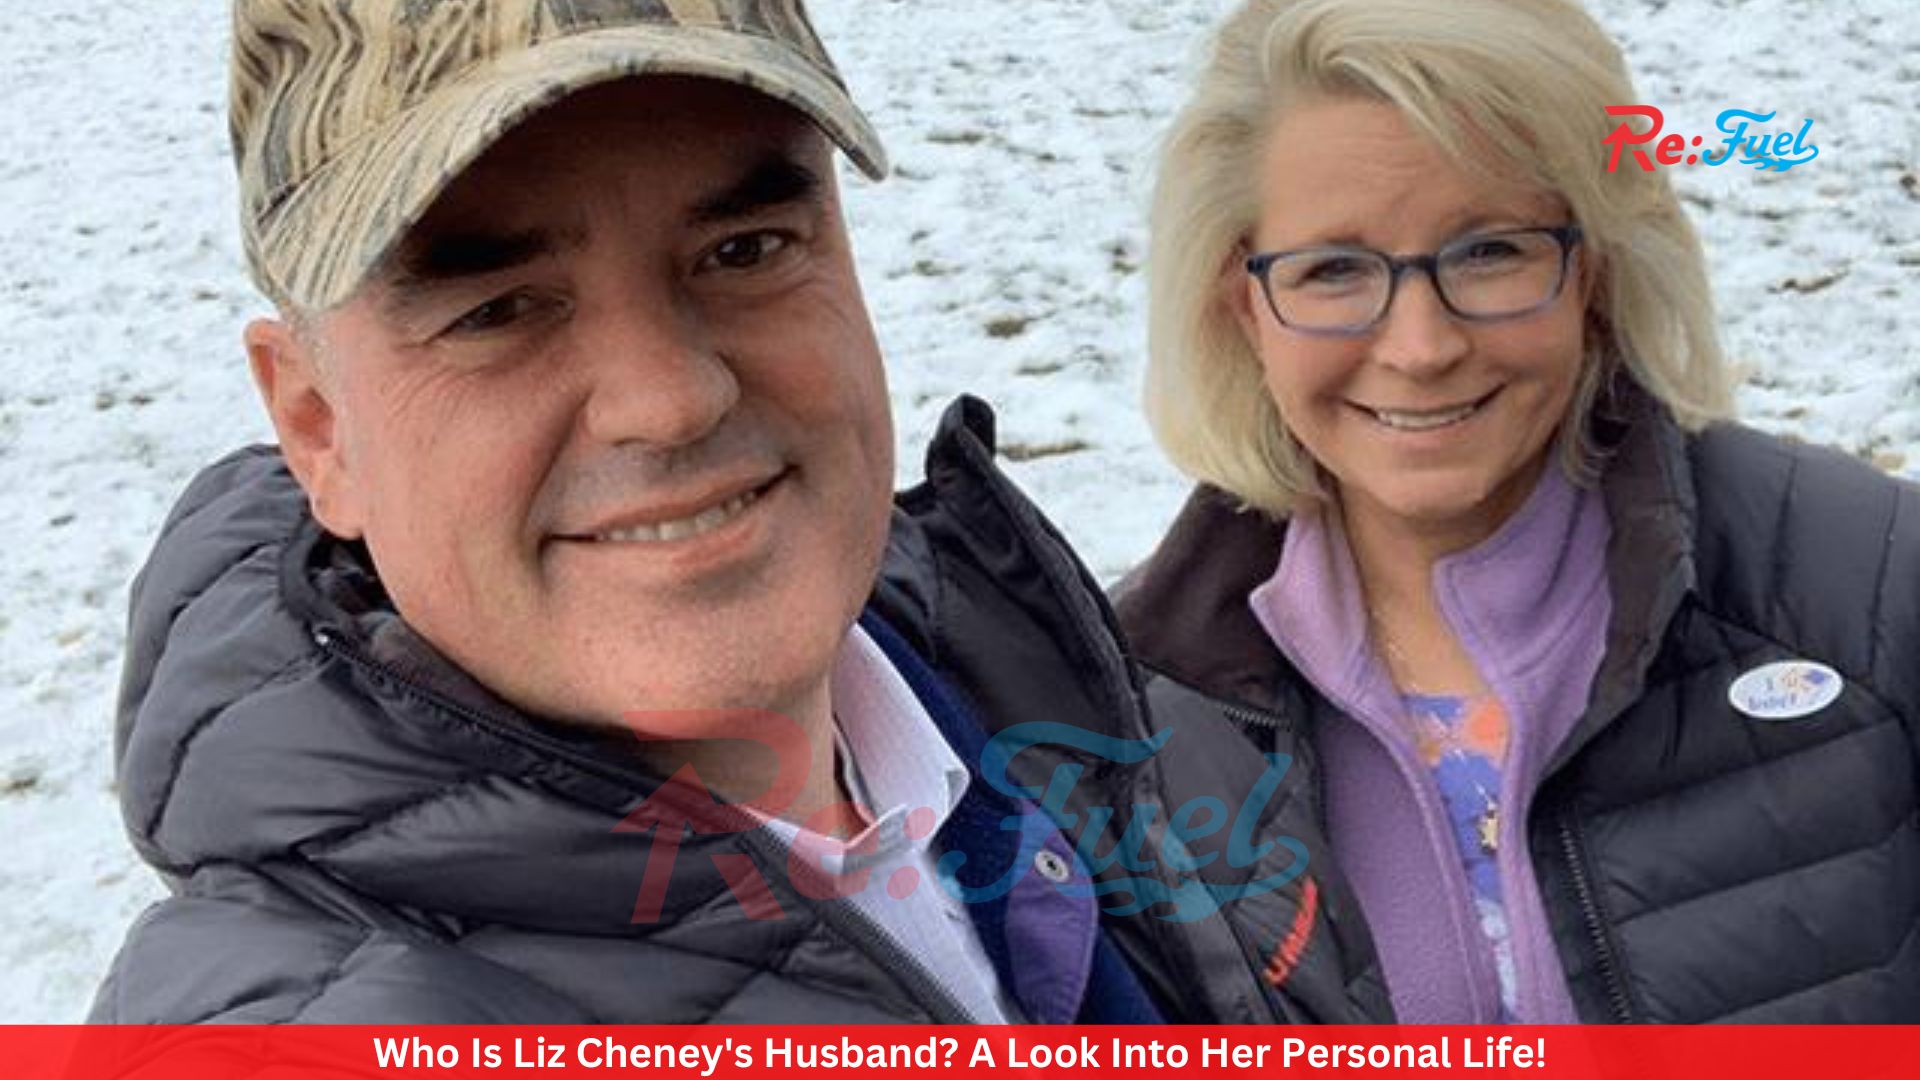 Who Is Liz Cheney's Husband? A Look Into Her Personal Life!